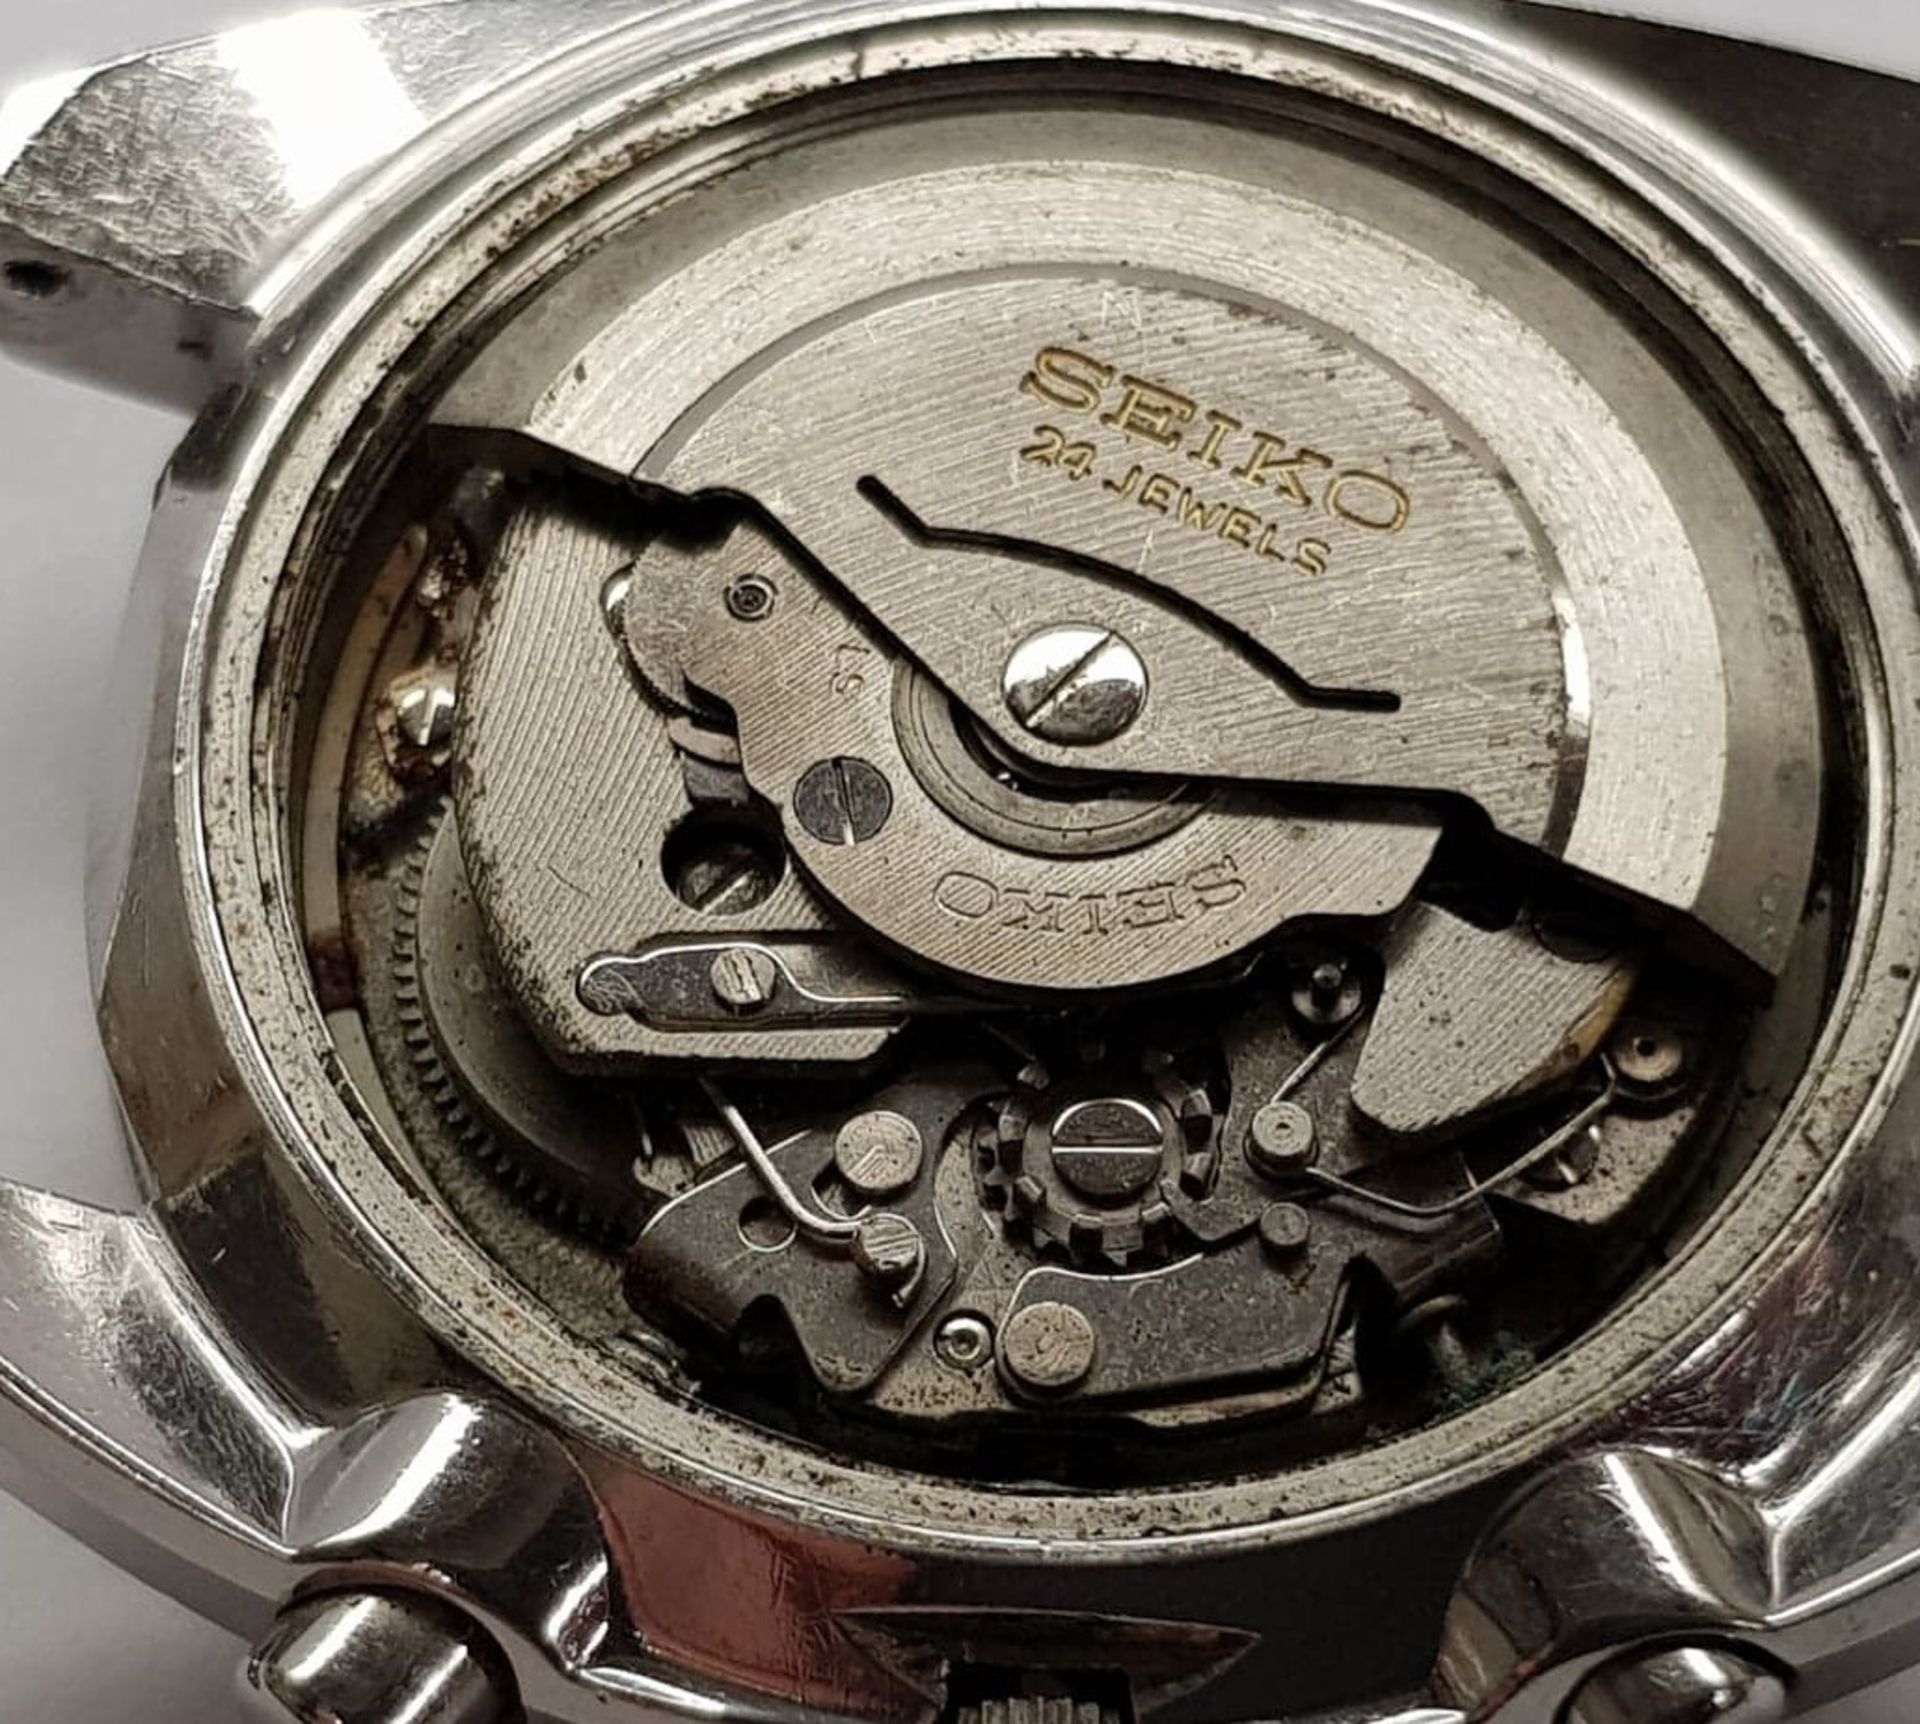 Seiko Bell-Matic 4006-7000 - Image 3 of 4